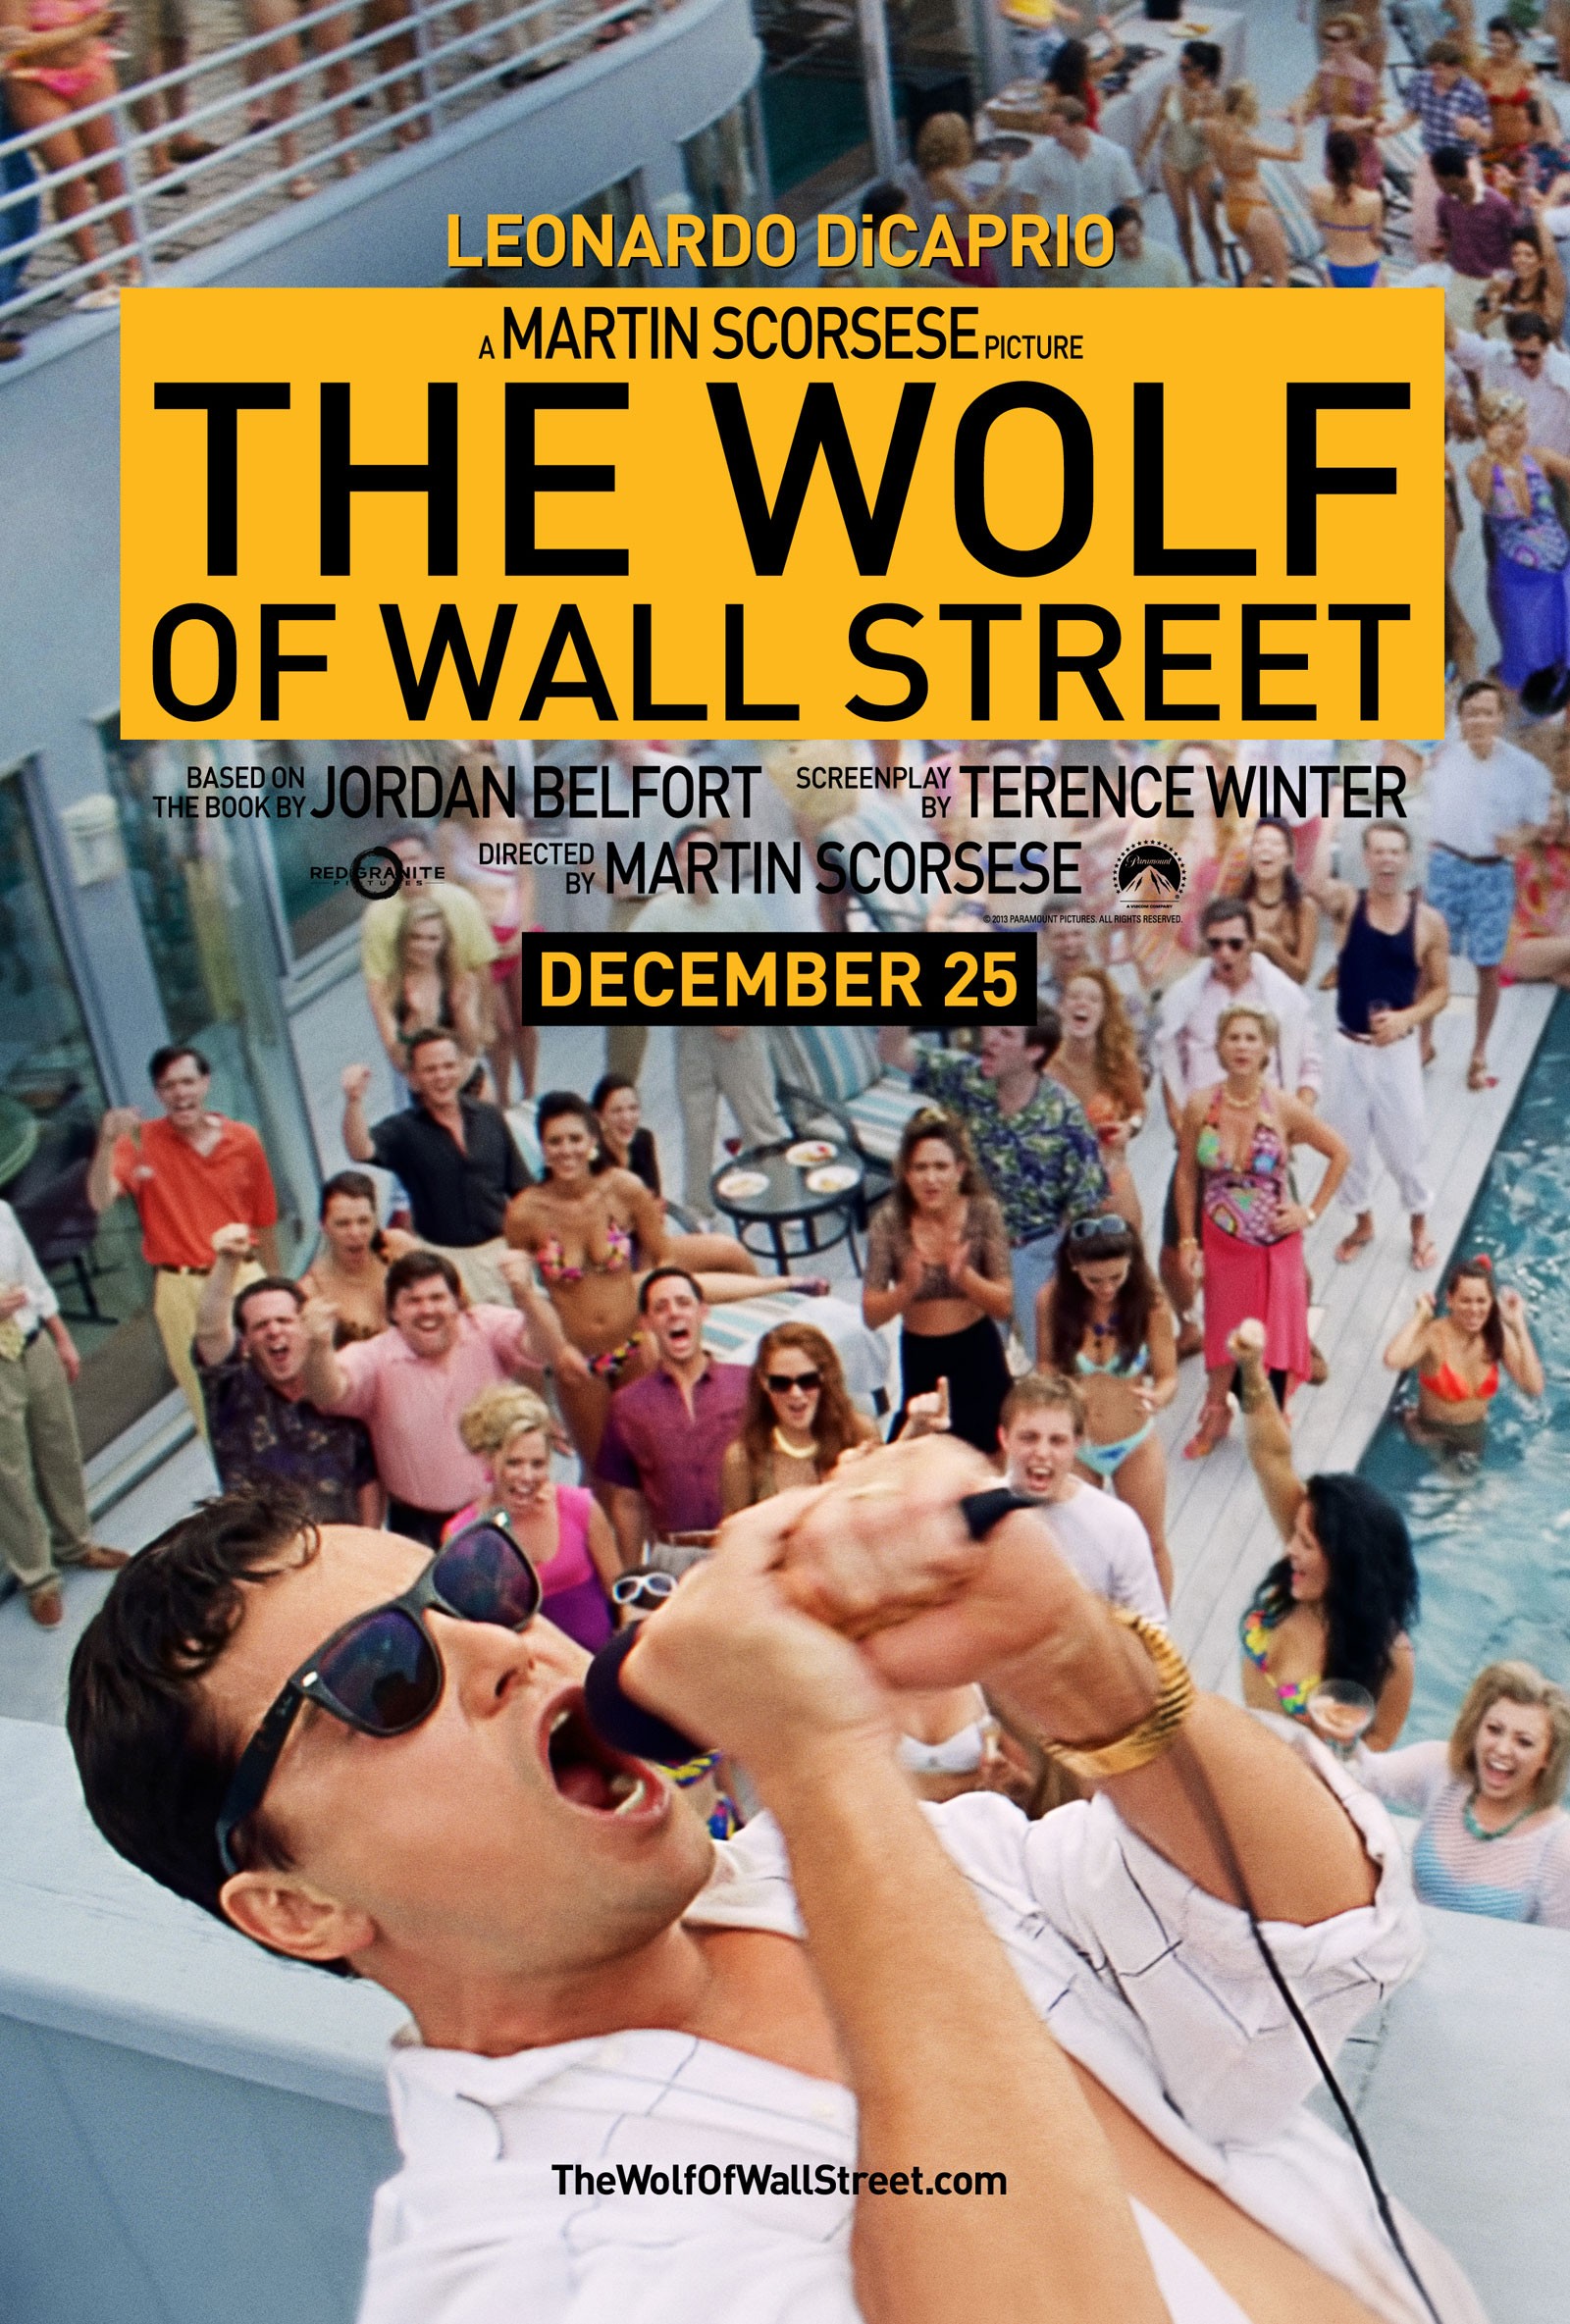 Jon Hartley's cameo in The Wolf of Wall Street poster